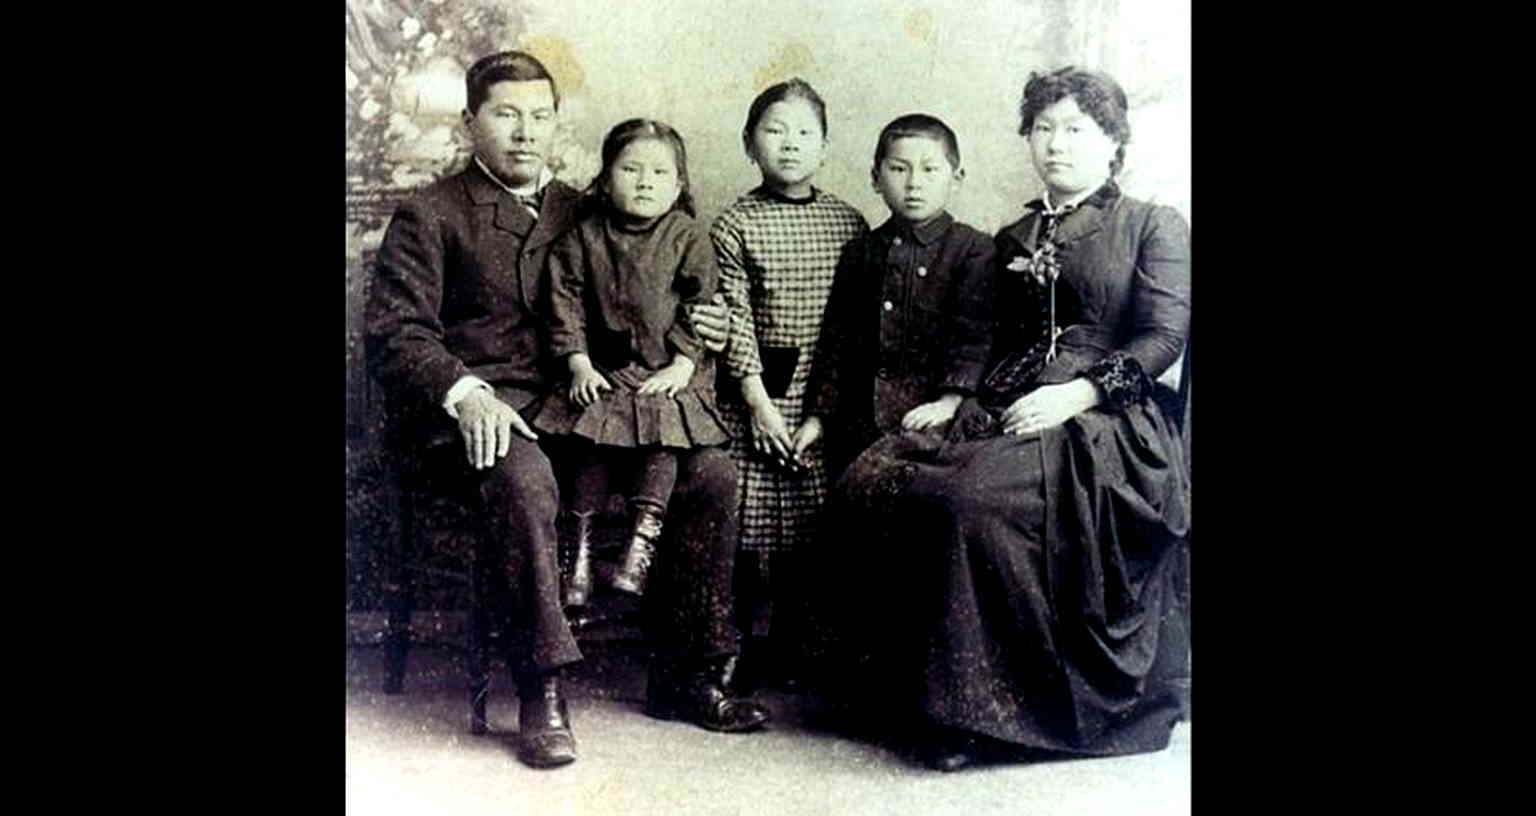 Before Brown v. Board of Education, These Chinese American Parents Fought for Desegregation in 1880s SF